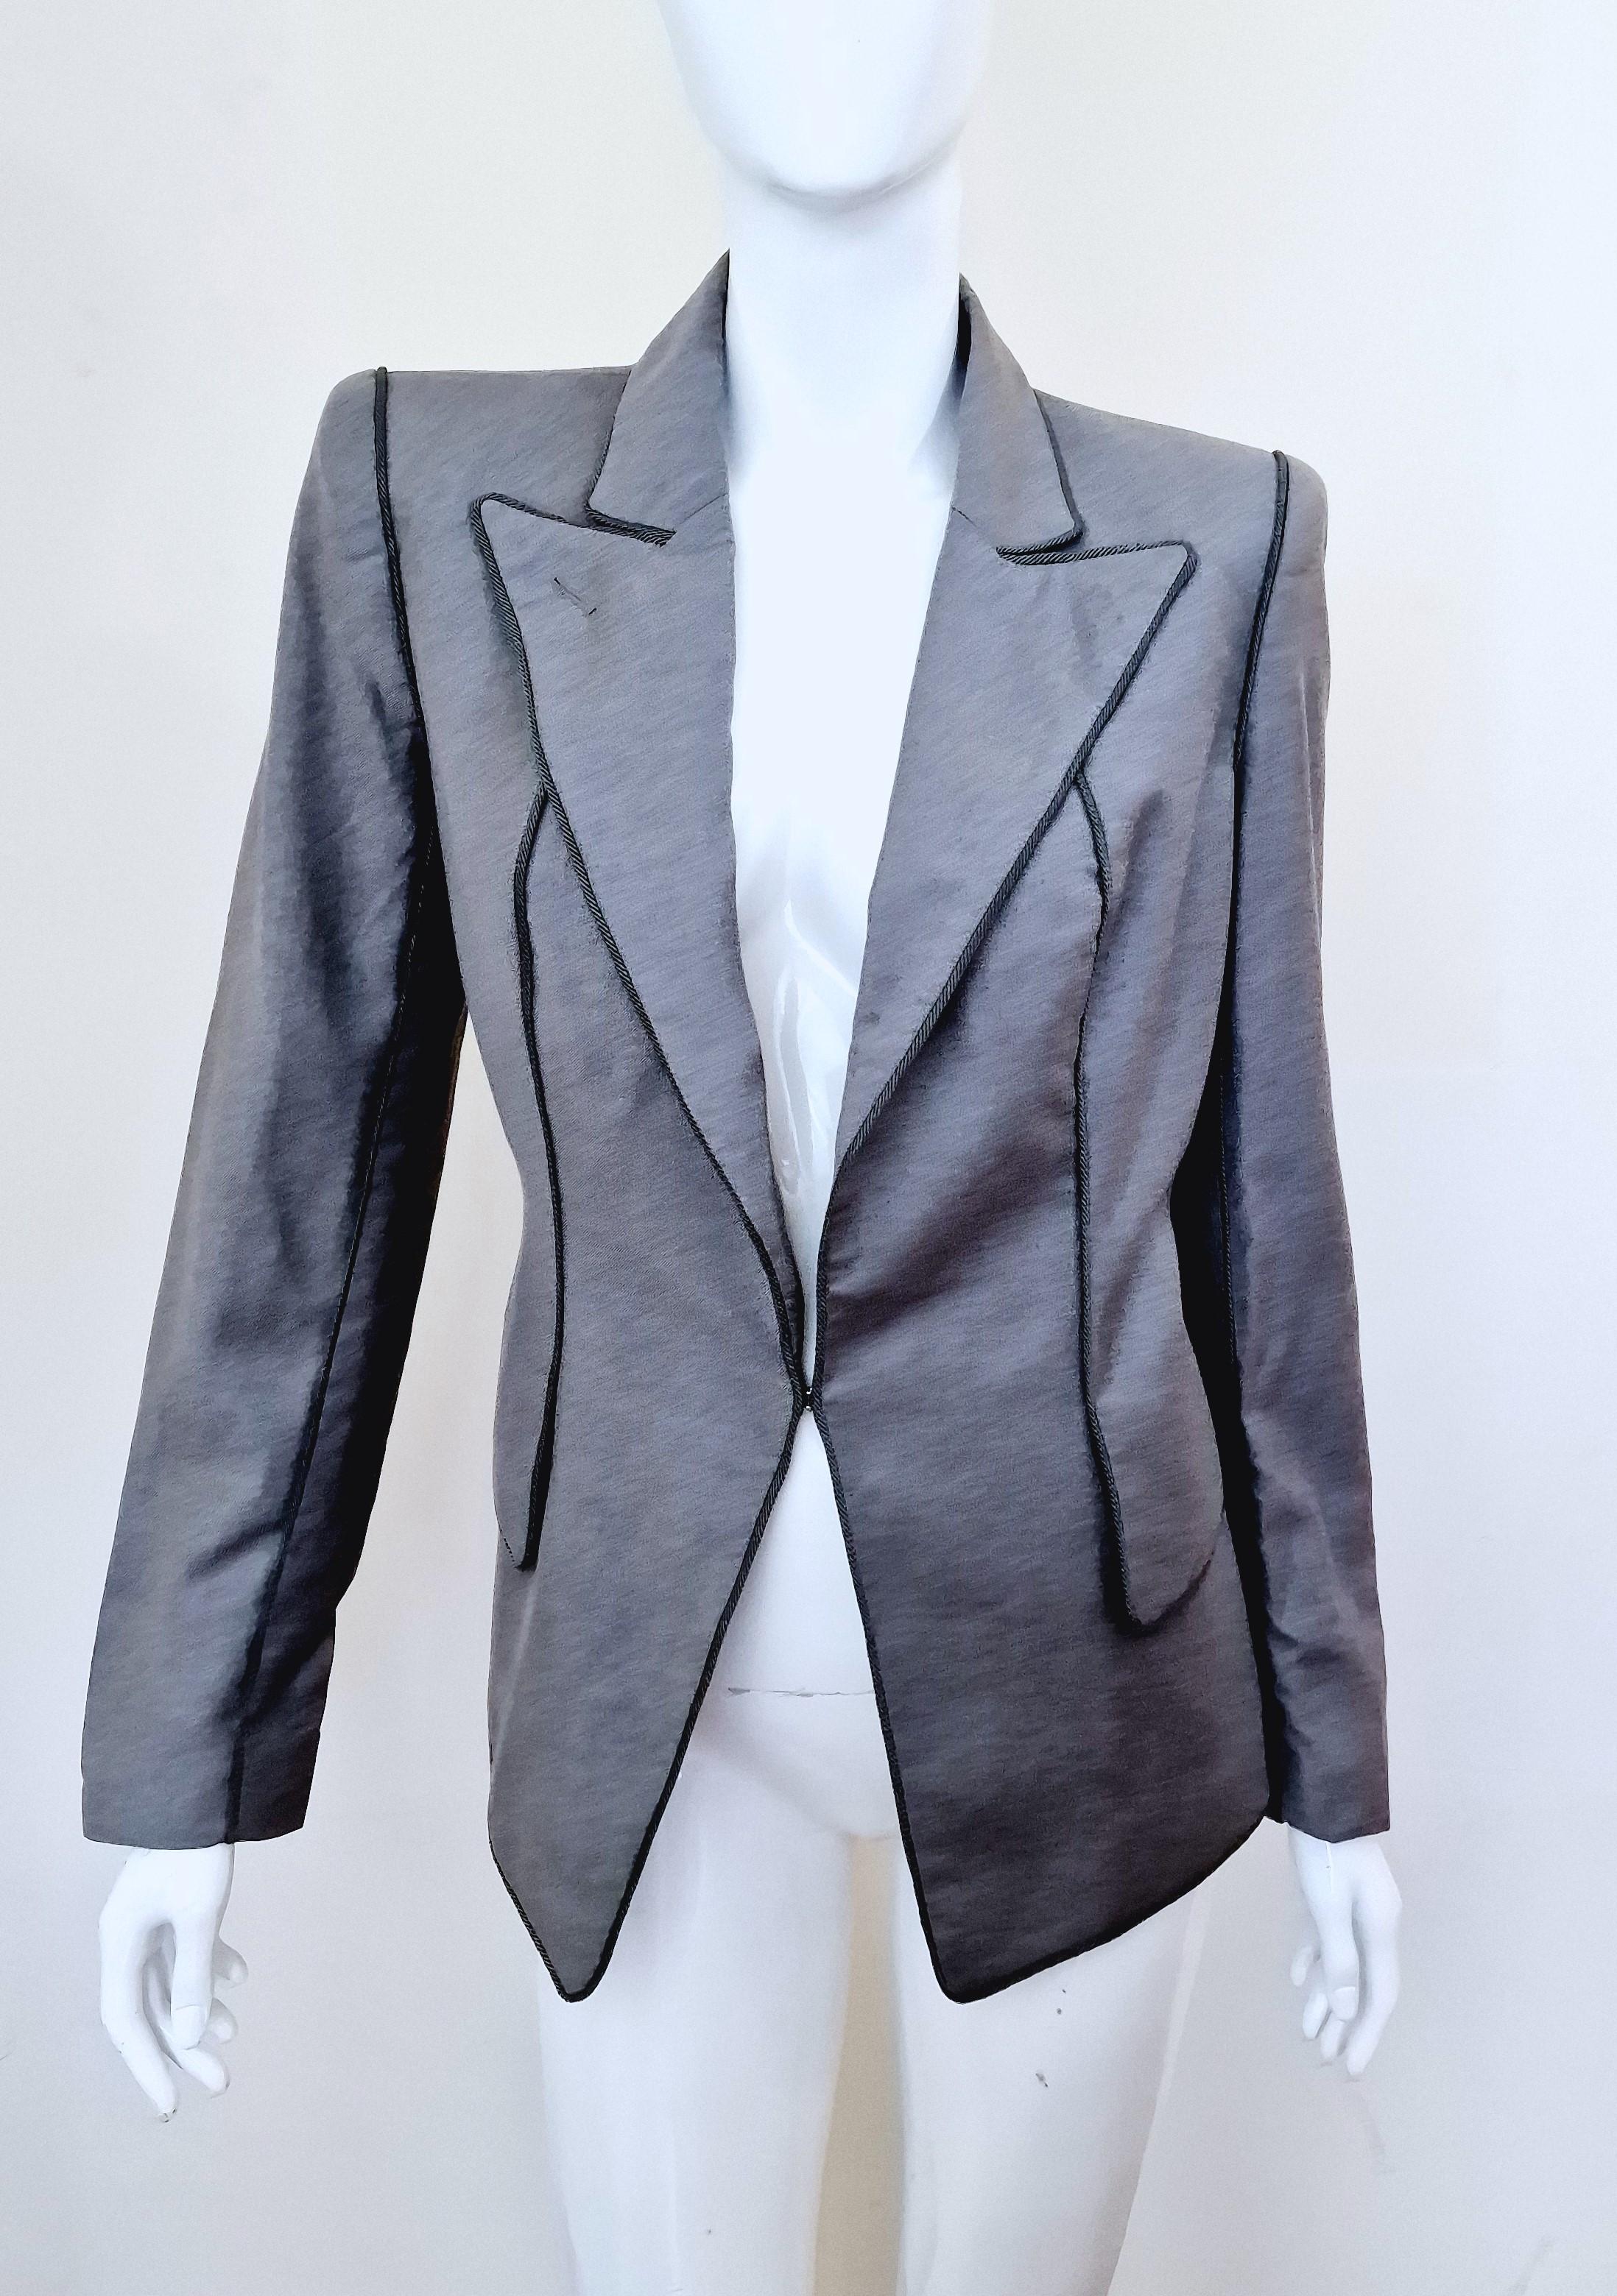 Alexander McQueen blazer jacket.
From the early McQueen`s ear!
With shuolder pads!

With shoulder pads!
100% wool! 
Silk liner!
Inner pocket.

EXCELLENT condition!

SIZE
Medium.
Makred size: IT42.
Length: 67 cm / 26.4 inch
Bust: 42 cm / 16.5